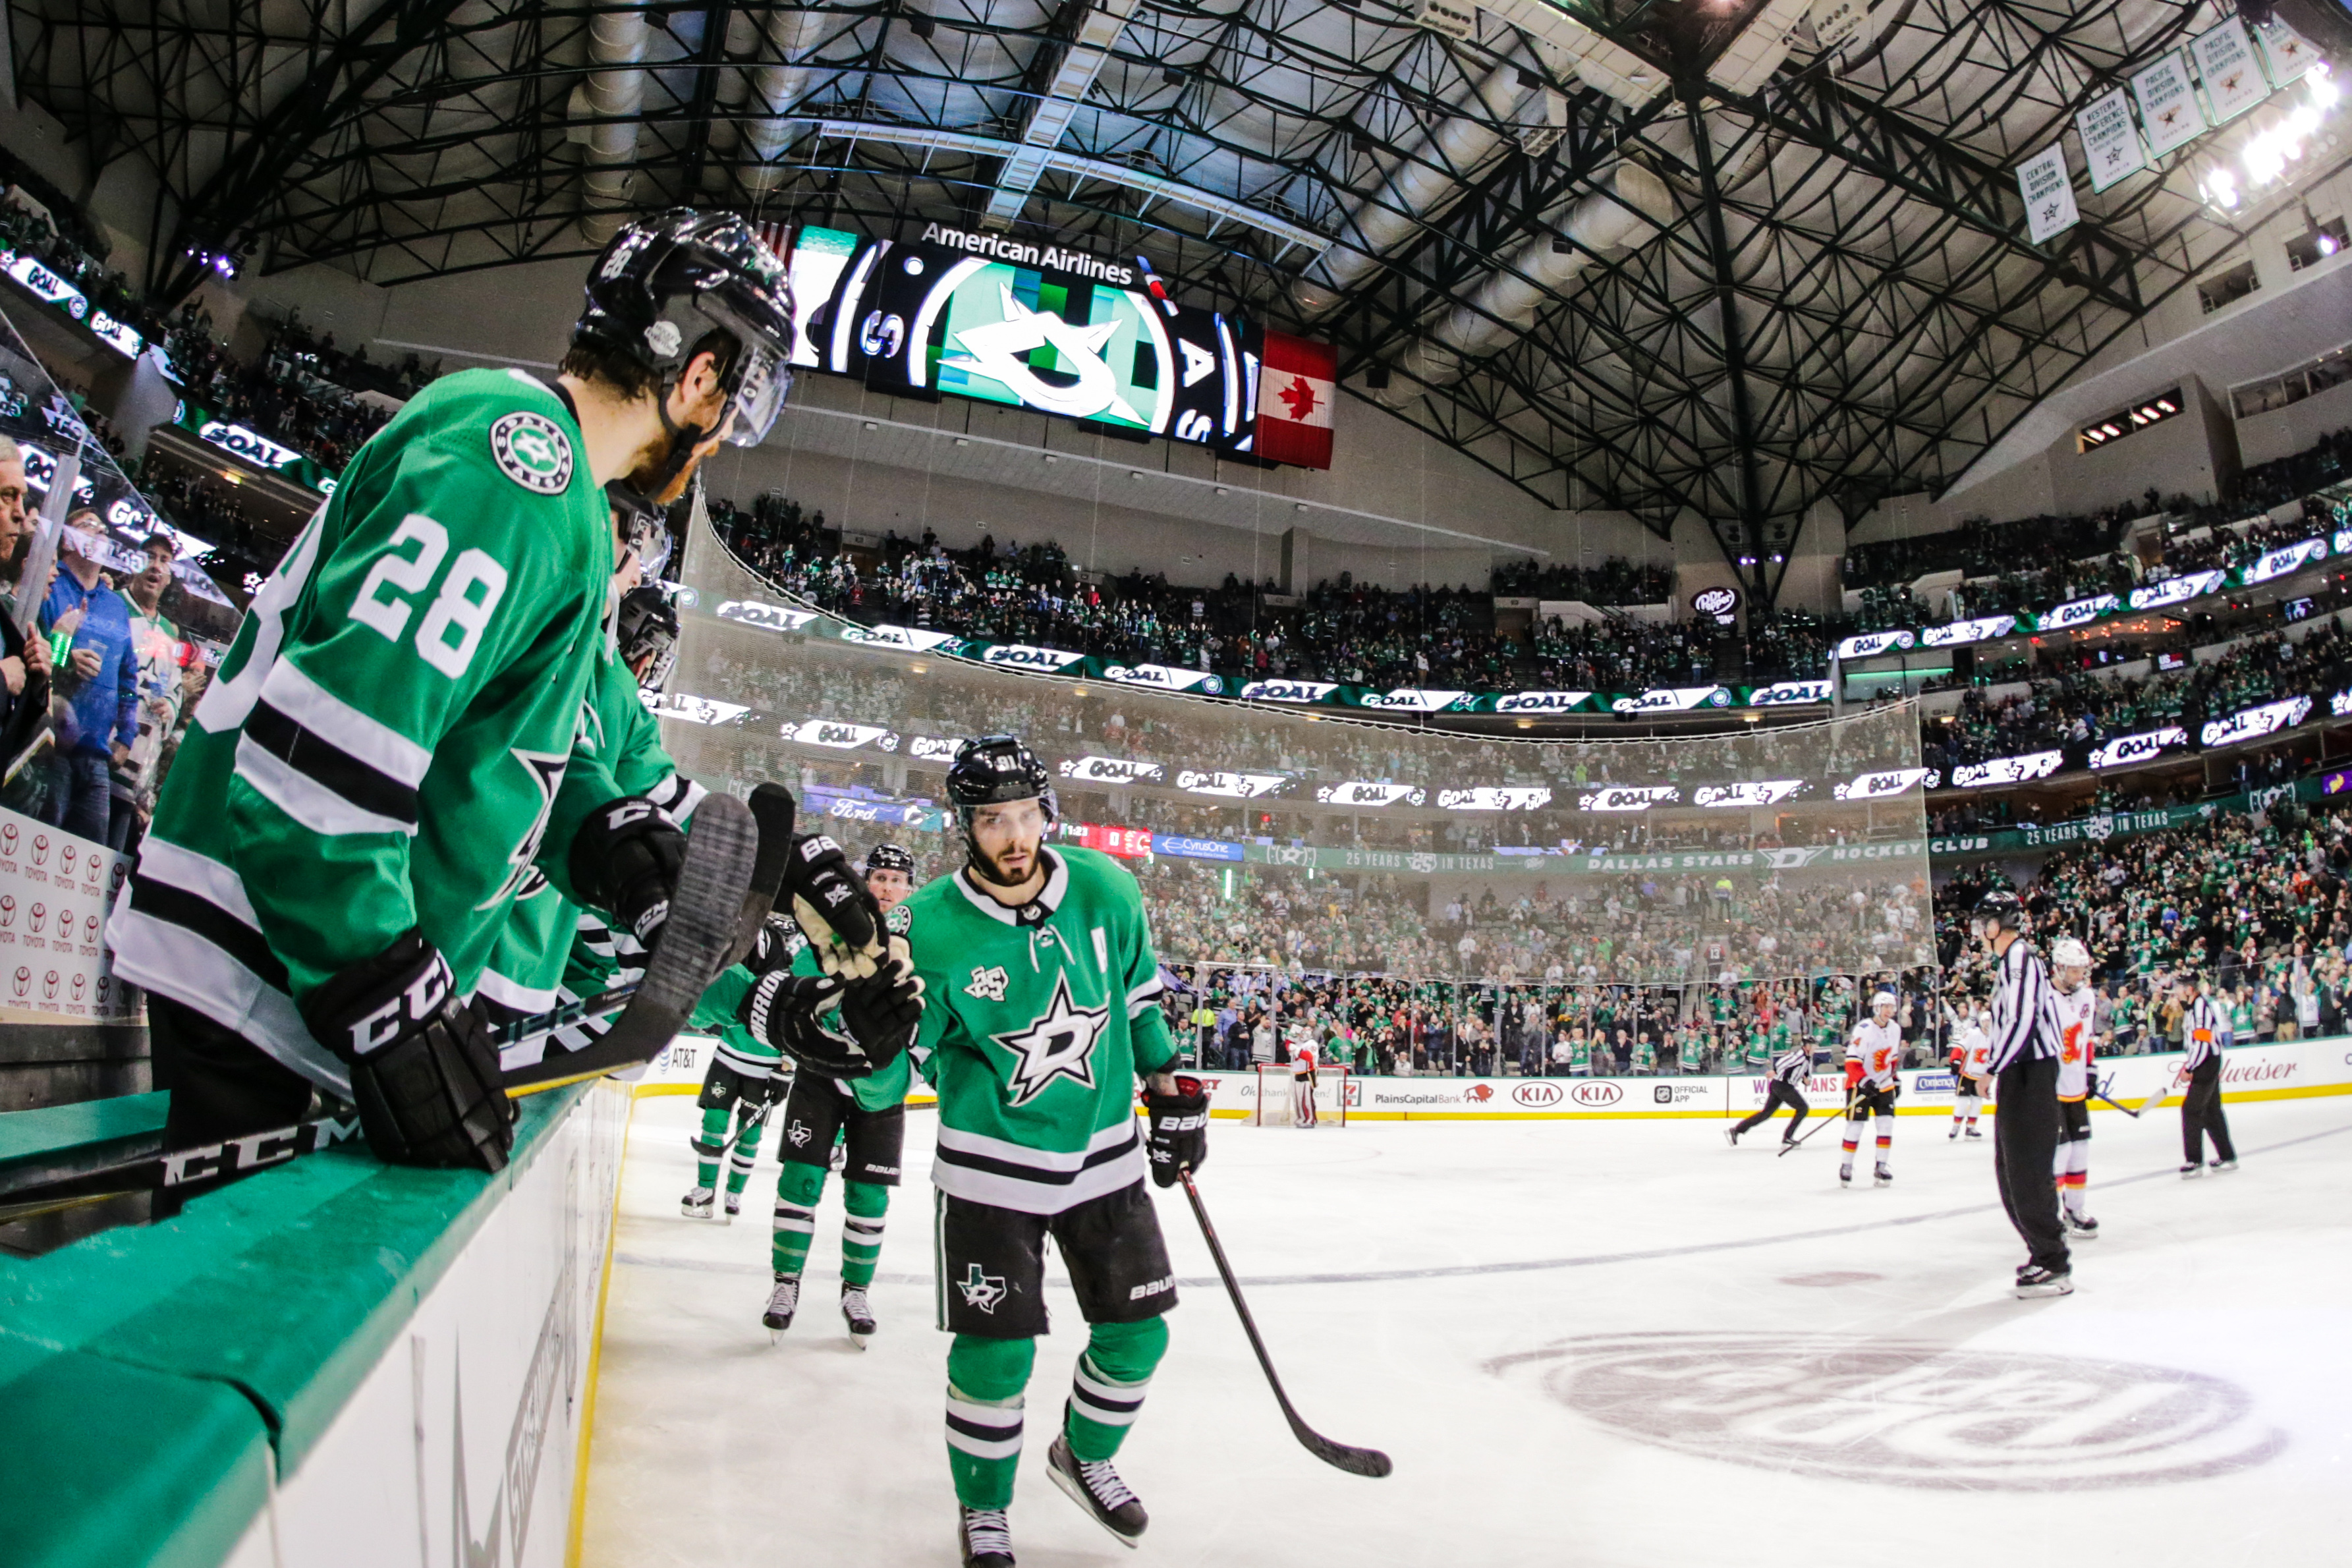 Dallas Stars: Five Questions The Team Must Face In 2018 Offseason